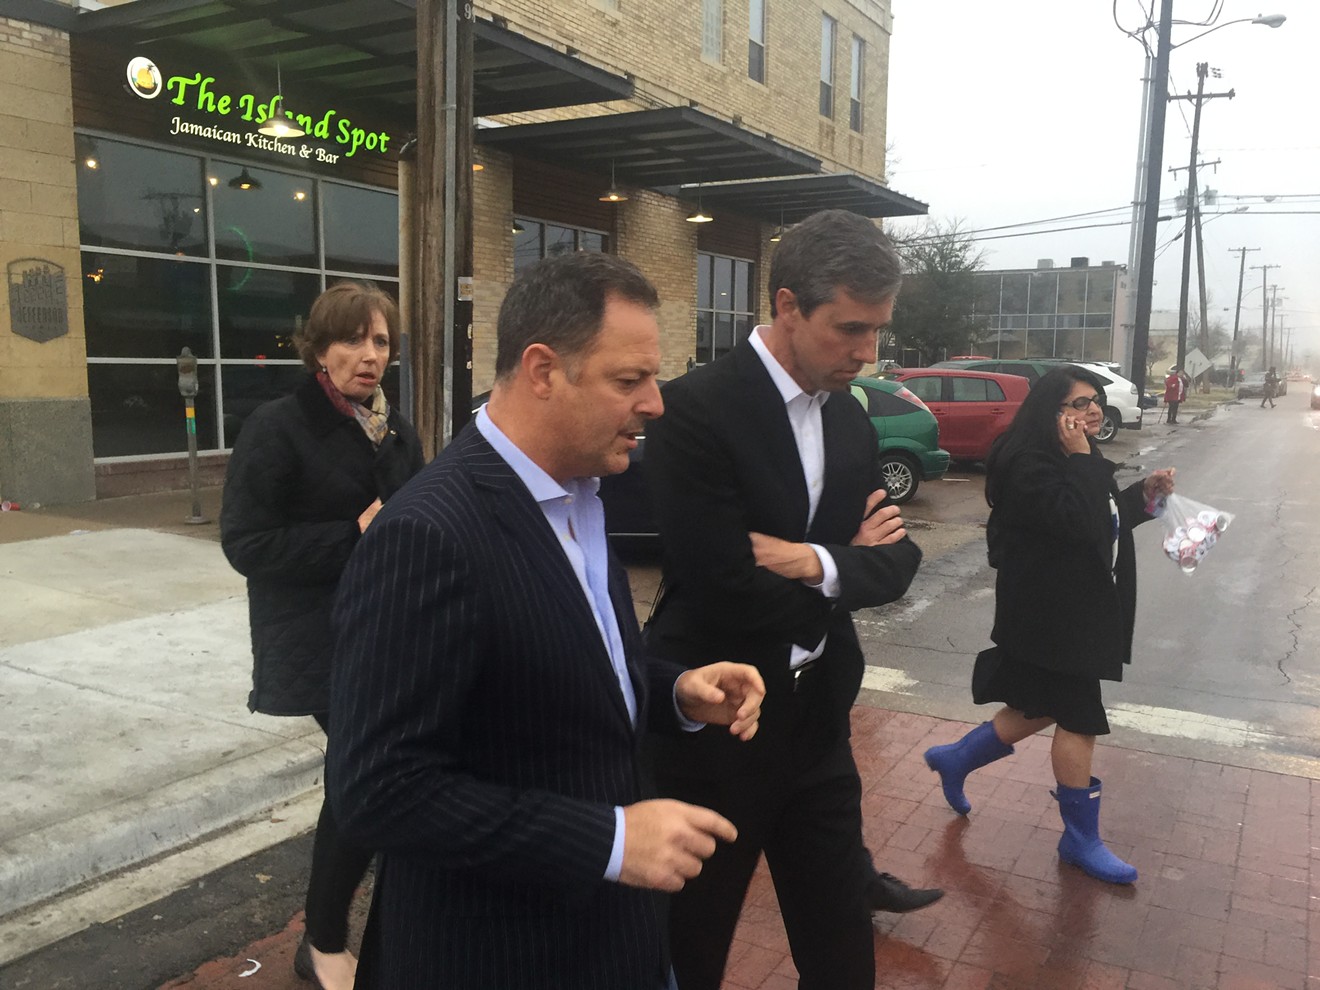 State Rep. Rafael Anchia (left) headed to the Texas Theatre with U.S. Rep. Beto O'Rourke during a brief tour of Oak Cliff's Jefferson Boulevard in March.